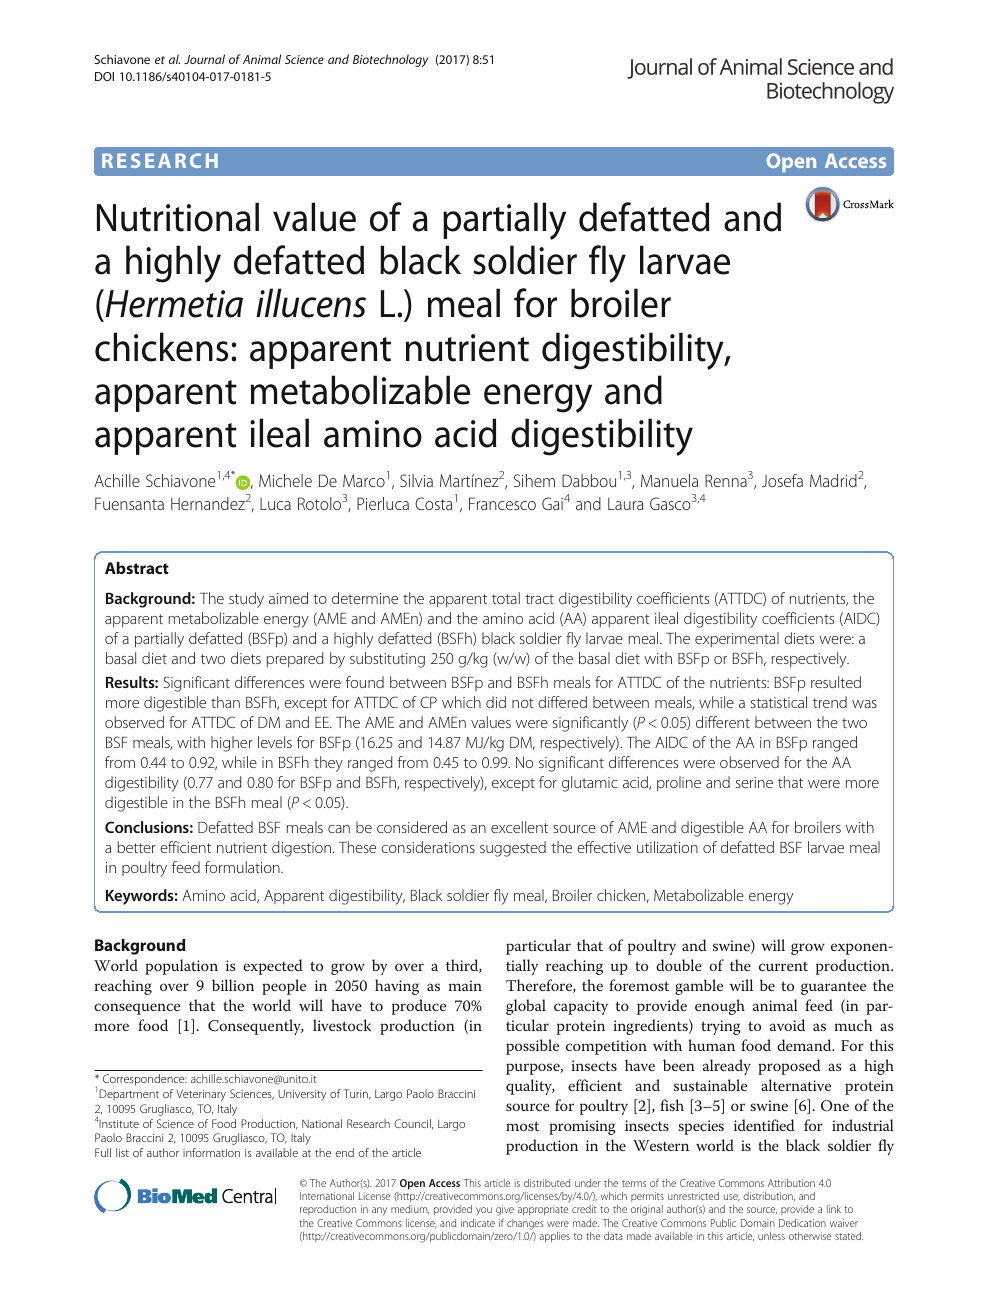 Nutritional value of a partially defatted and a highly defatted black  soldier fly larvae (Hermetia illucens L.) meal for broiler chickens:  apparent nutrient digestibility, apparent metabolizable energy and apparent  ileal amino acid